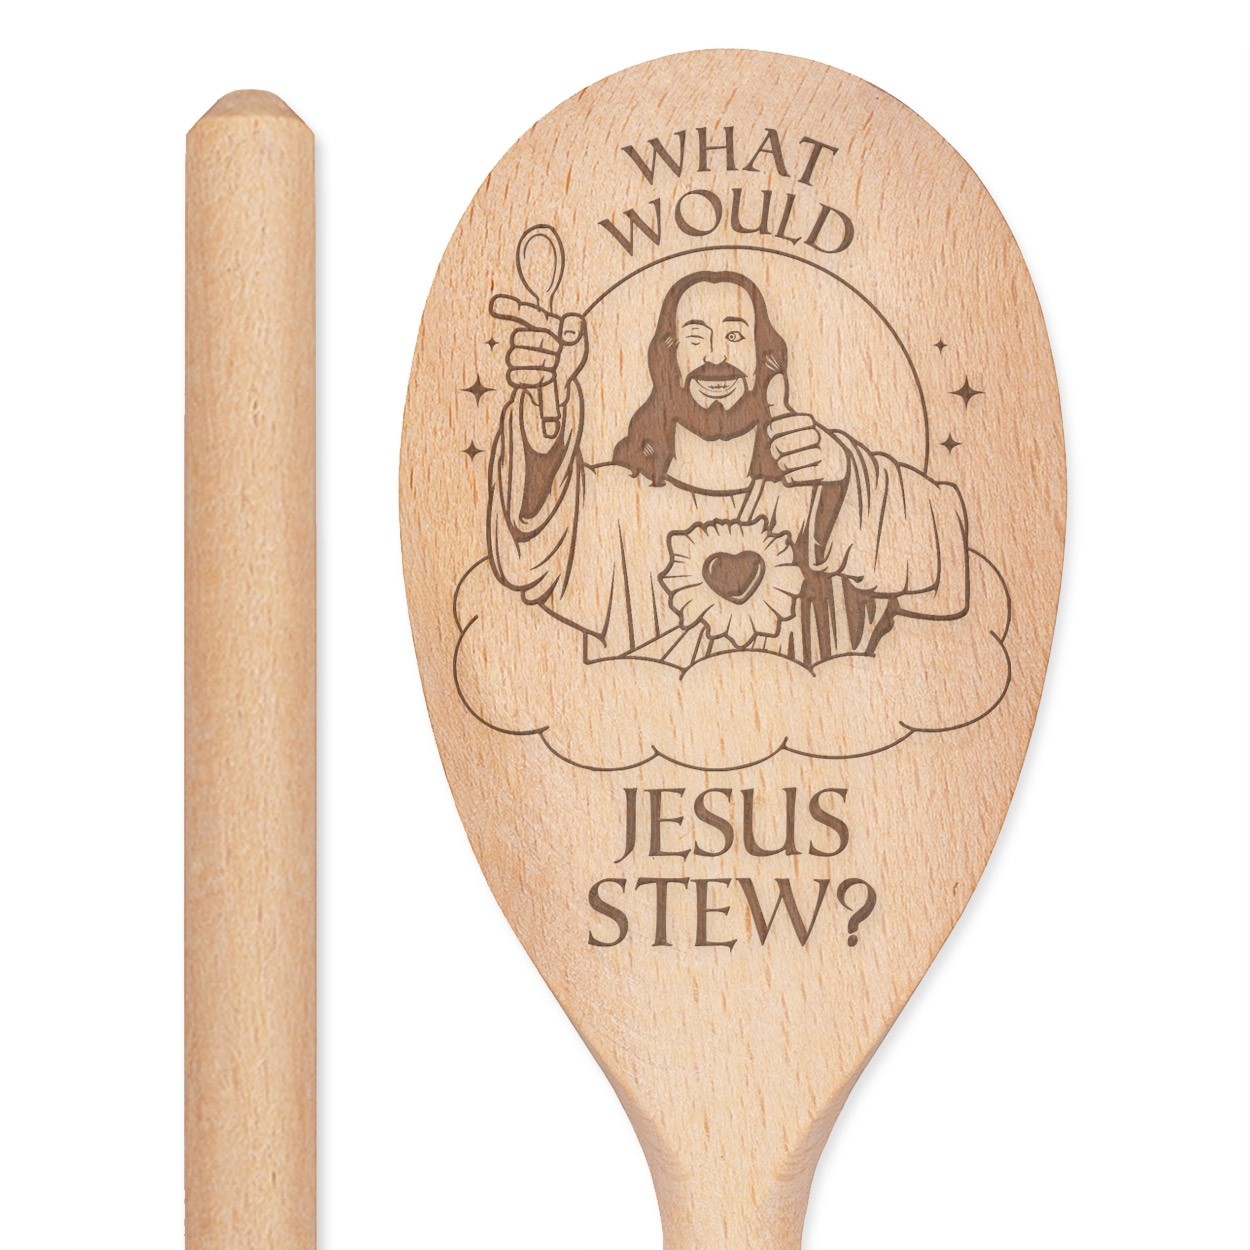 What Would Jesus Do Stew Wooden Spoon Baker Funny Christian God Religious